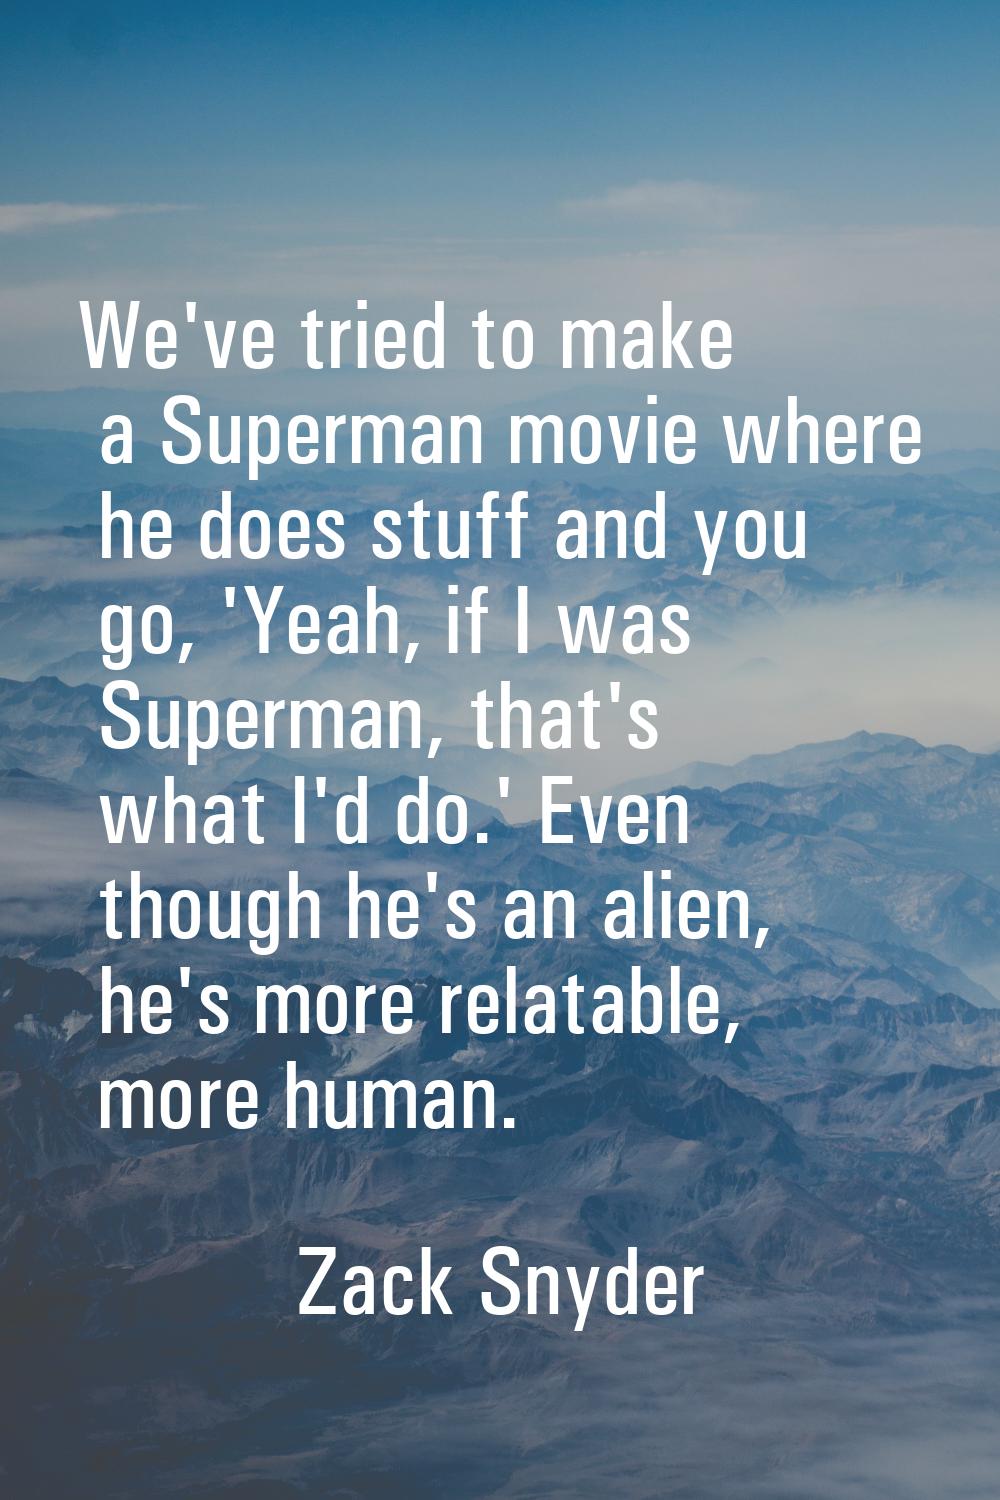 We've tried to make a Superman movie where he does stuff and you go, 'Yeah, if I was Superman, that